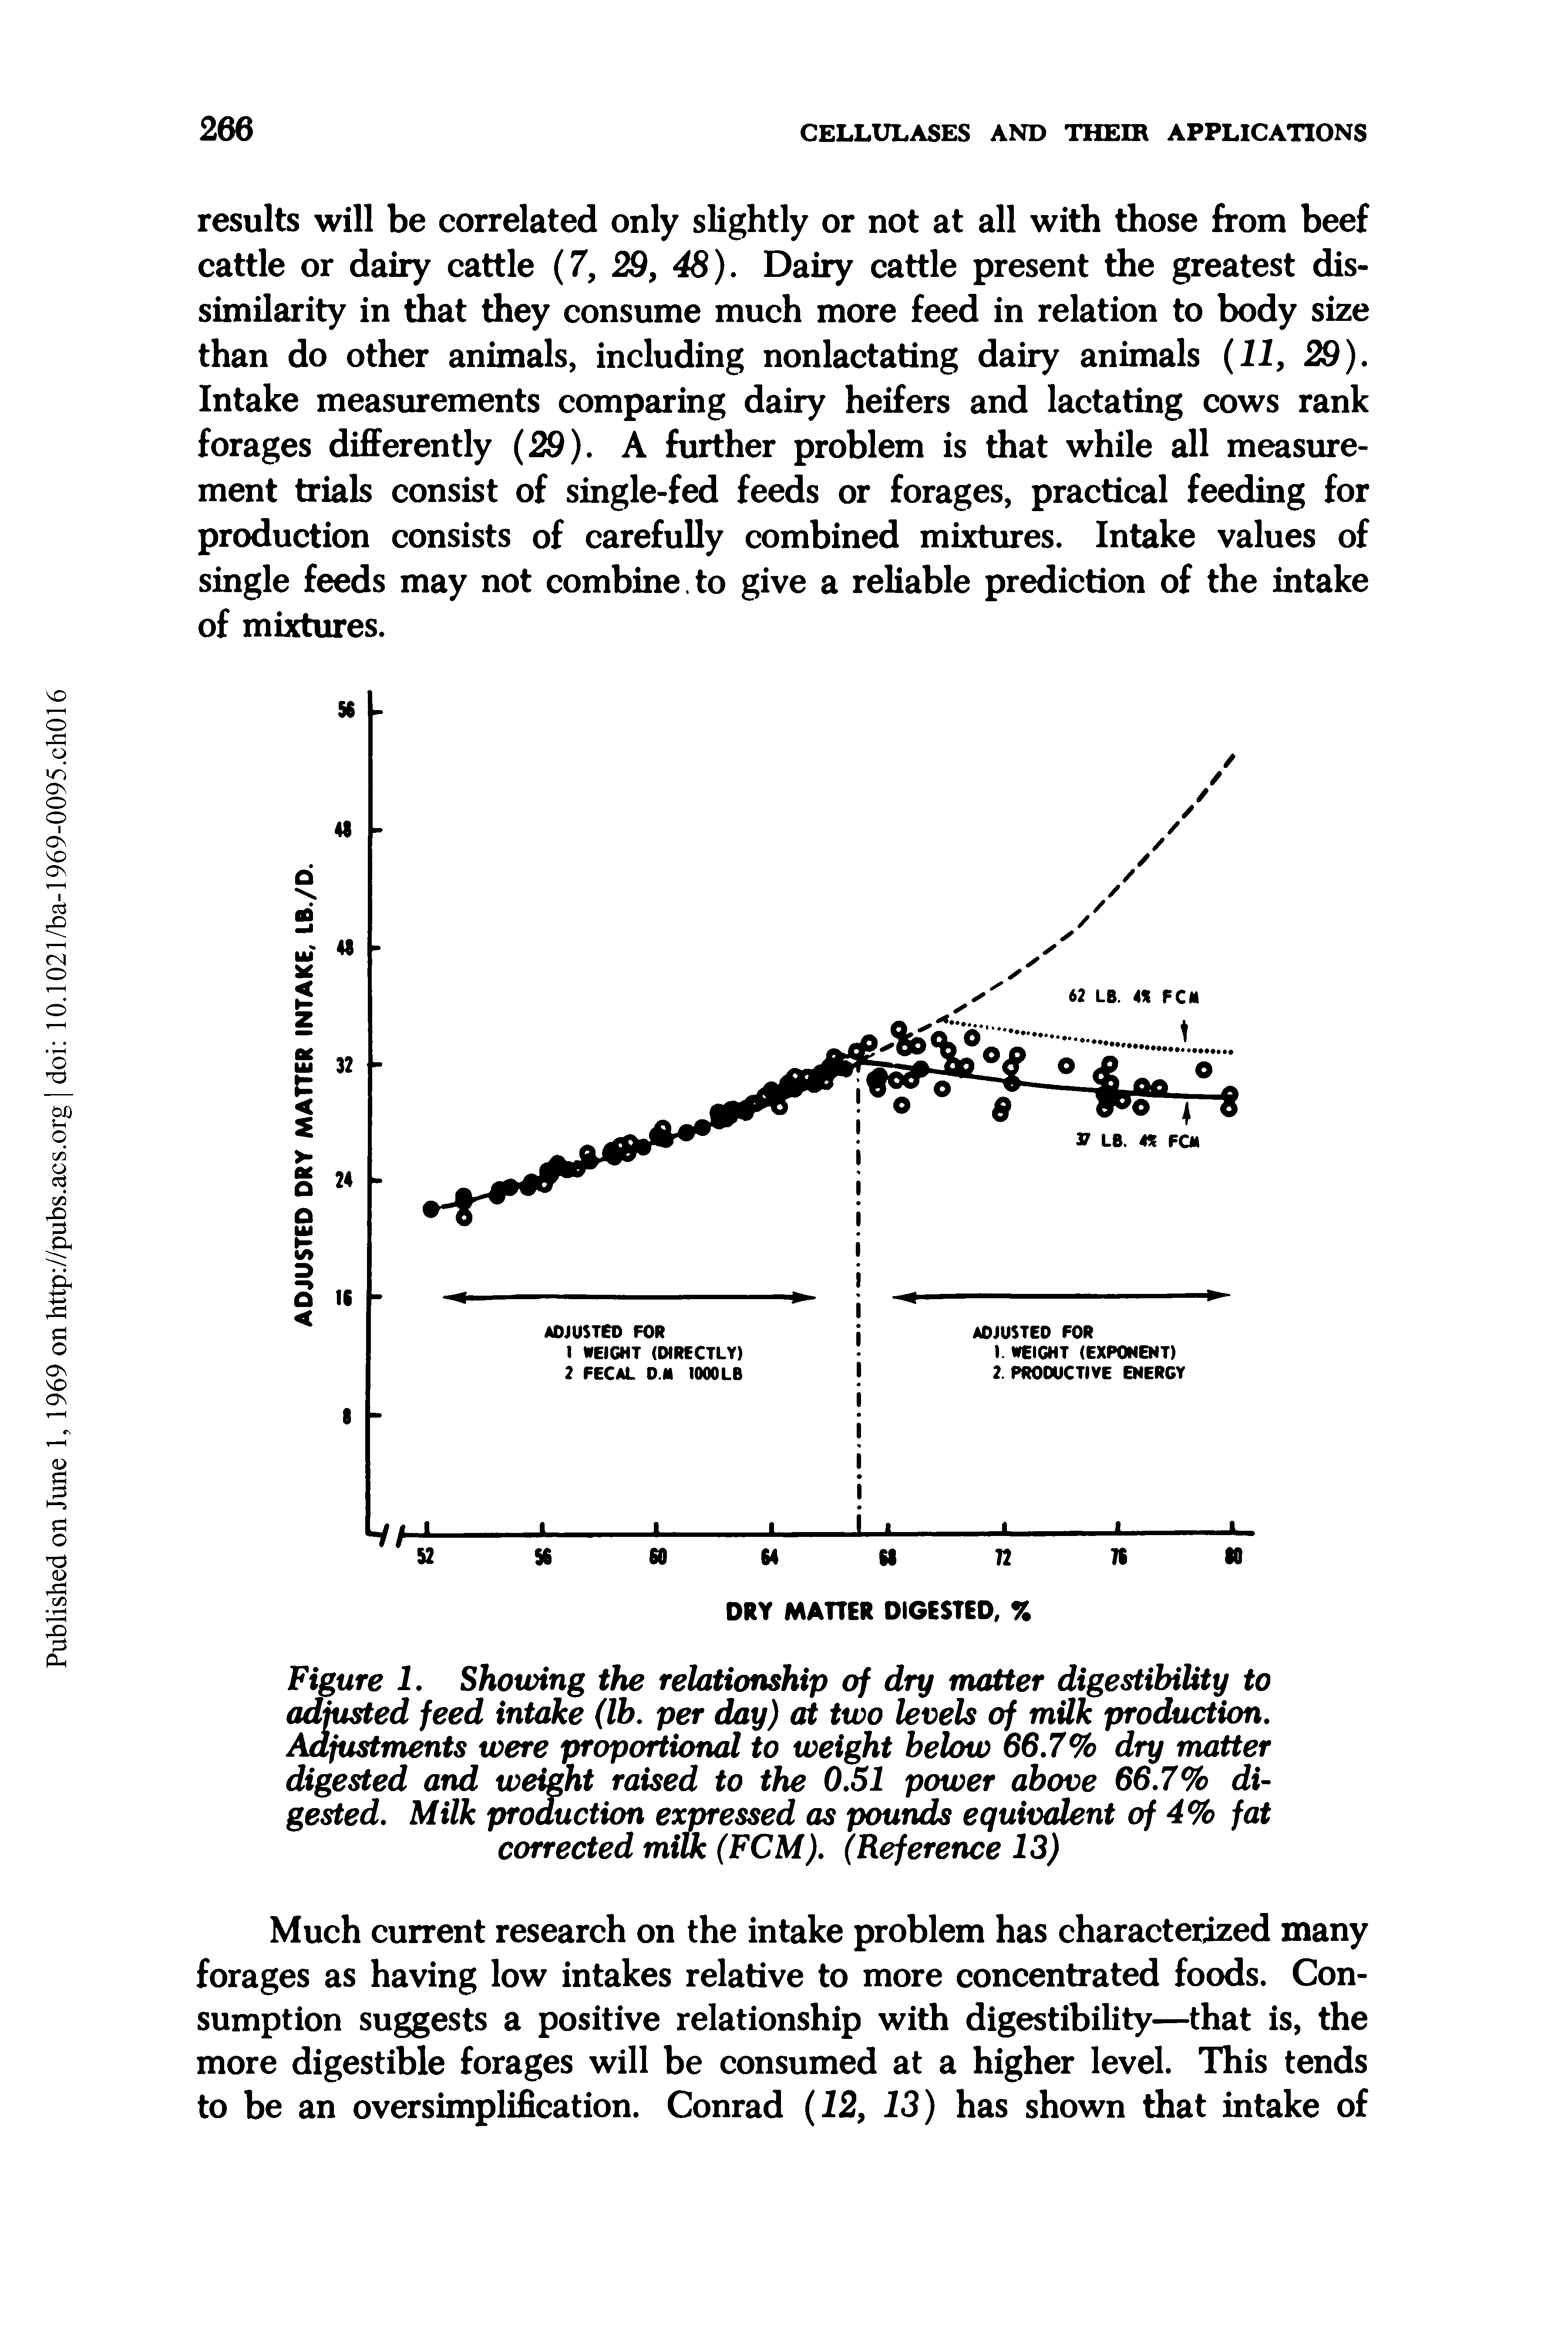 Figure 1. Showing the relationship of dry matter digestibility to adjusted feed intake (lb. per day) at two levels of milk production. Adjustments were proportional to weight below 66.7% dry matter digested and weight raised to the 0.51 power above 66.7% digested. Milk production expressed as pounds equivalent of 4% fat corrected milk (FCM). (Reference 13)...